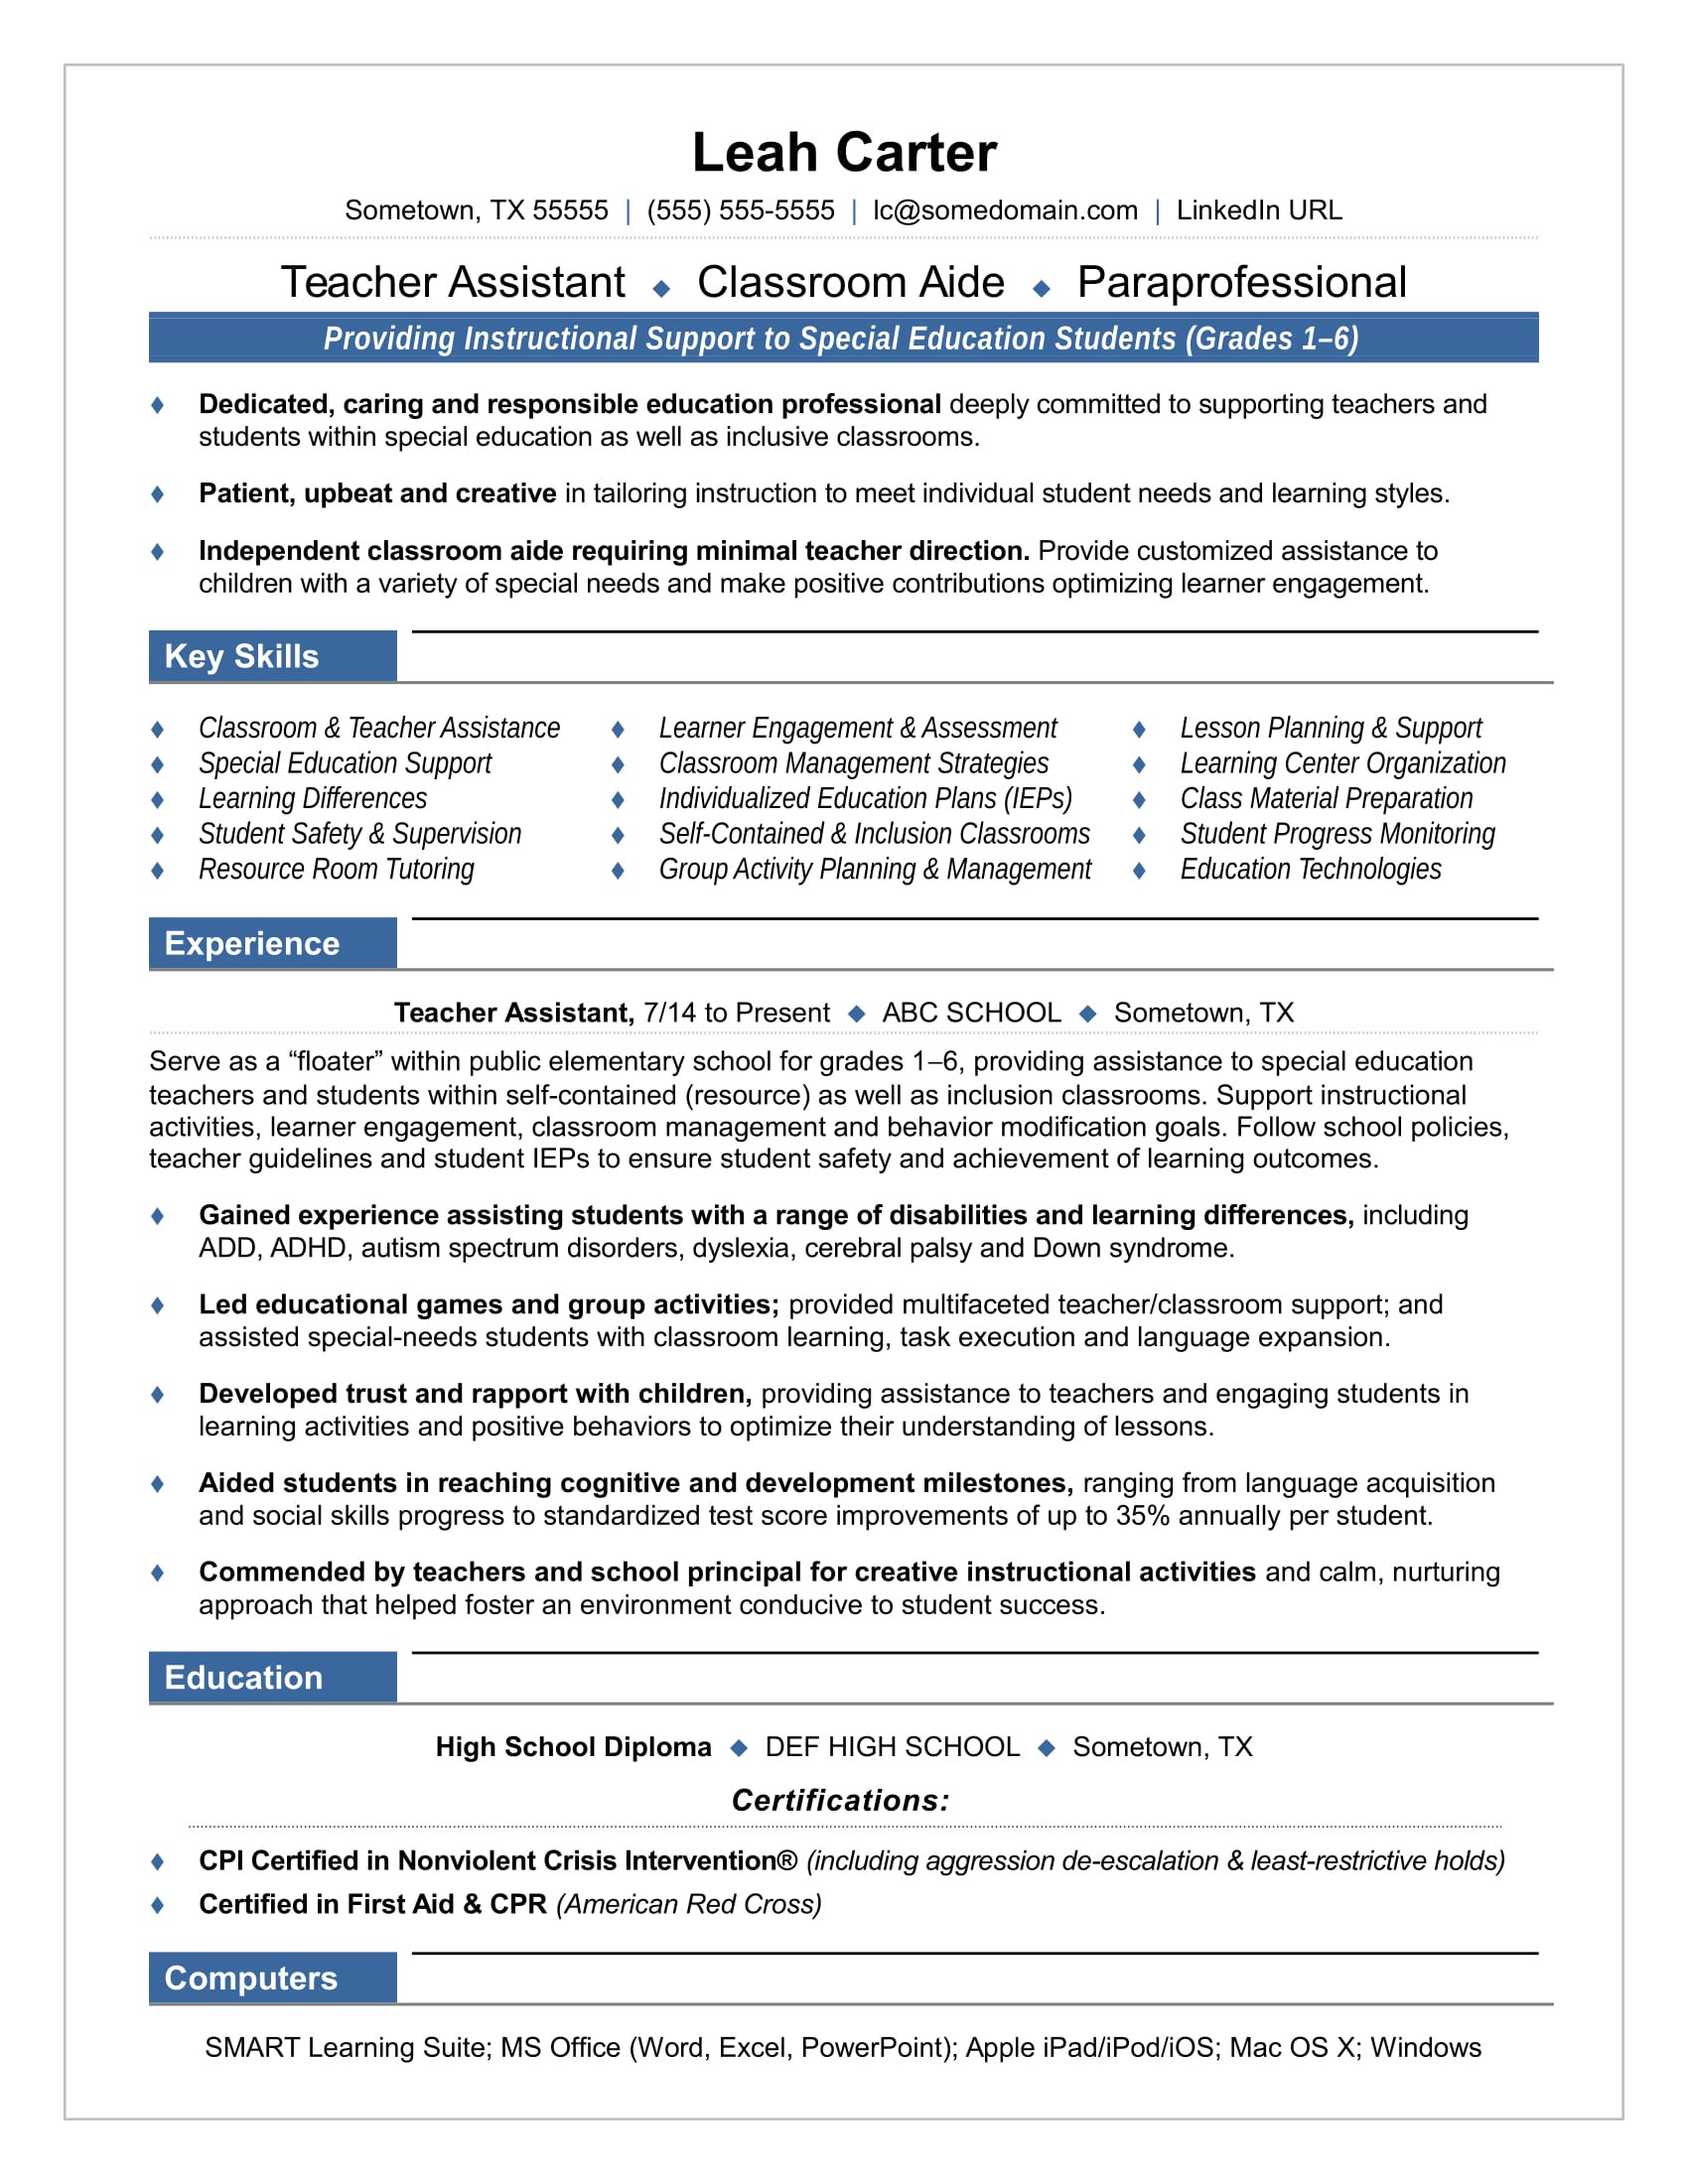 Resume Template for Students with Disabilities Teacher assistant Resume Sample Monster.com